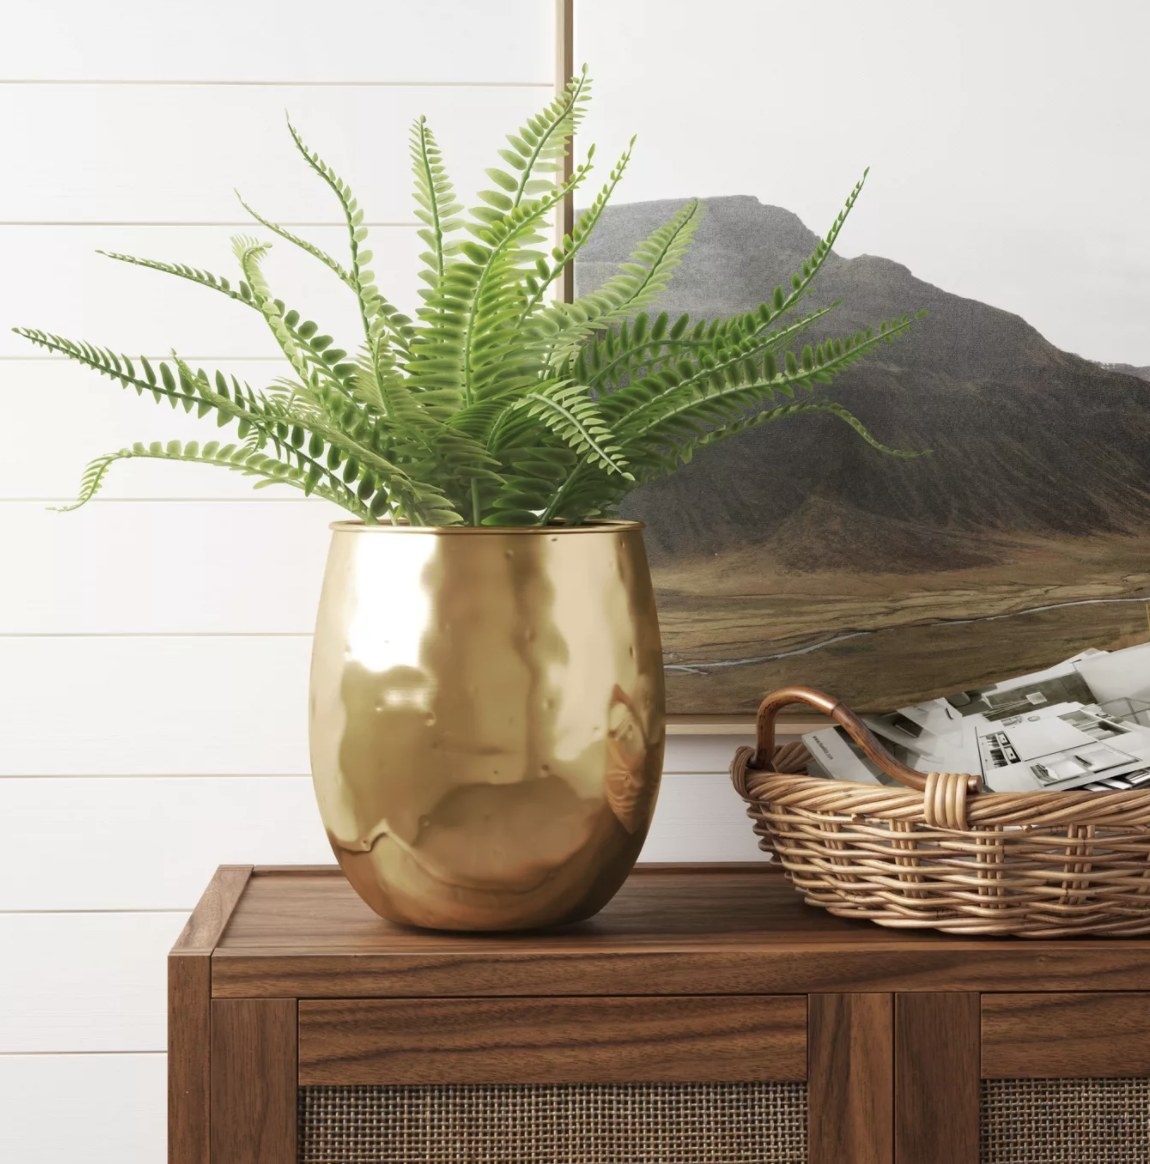 The planter is a tall vertical, shiny gold vase